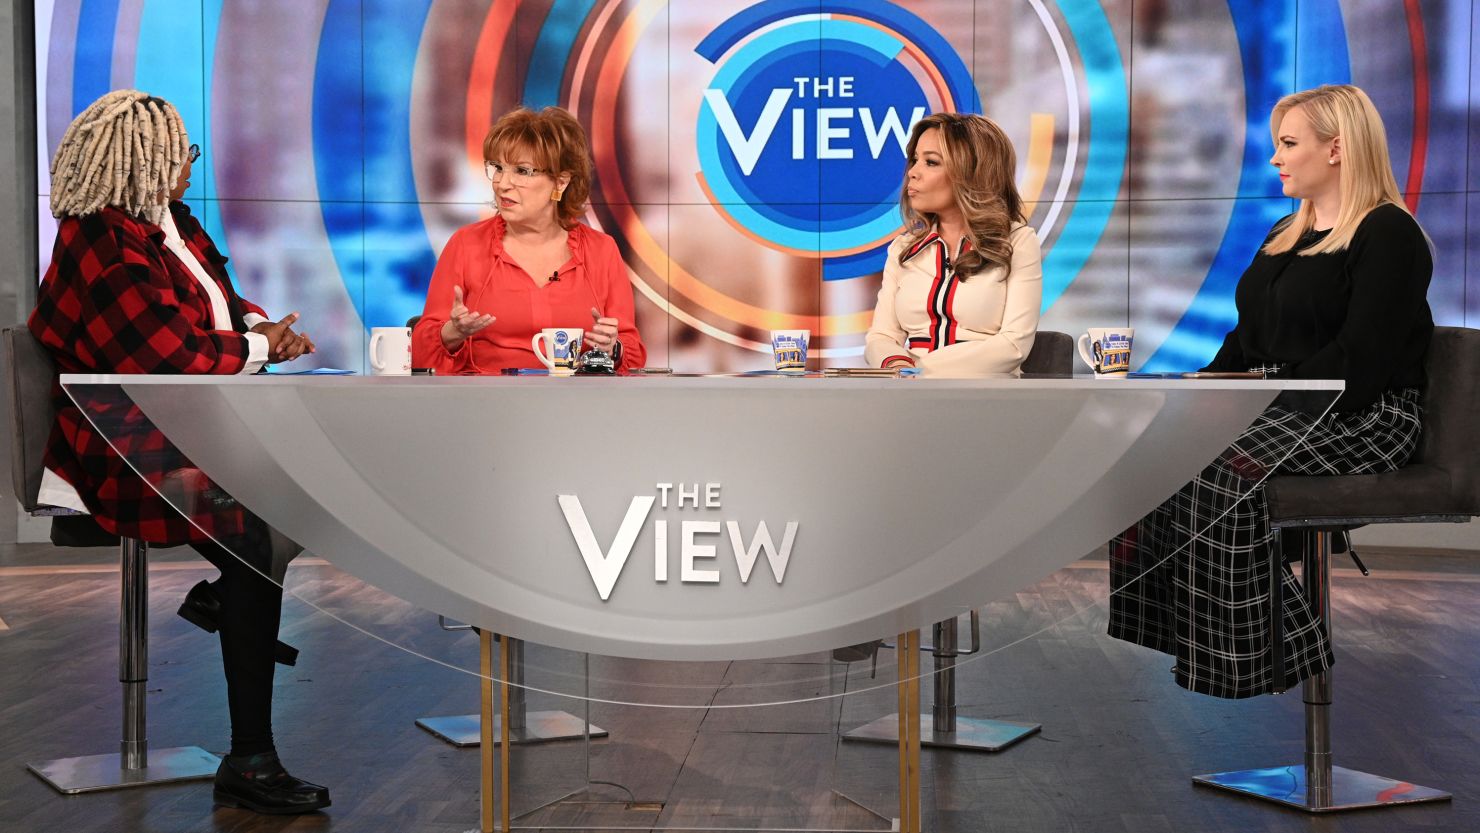 'The View' is among a growing number of talk shows suspending studio audiences over coronavirus.